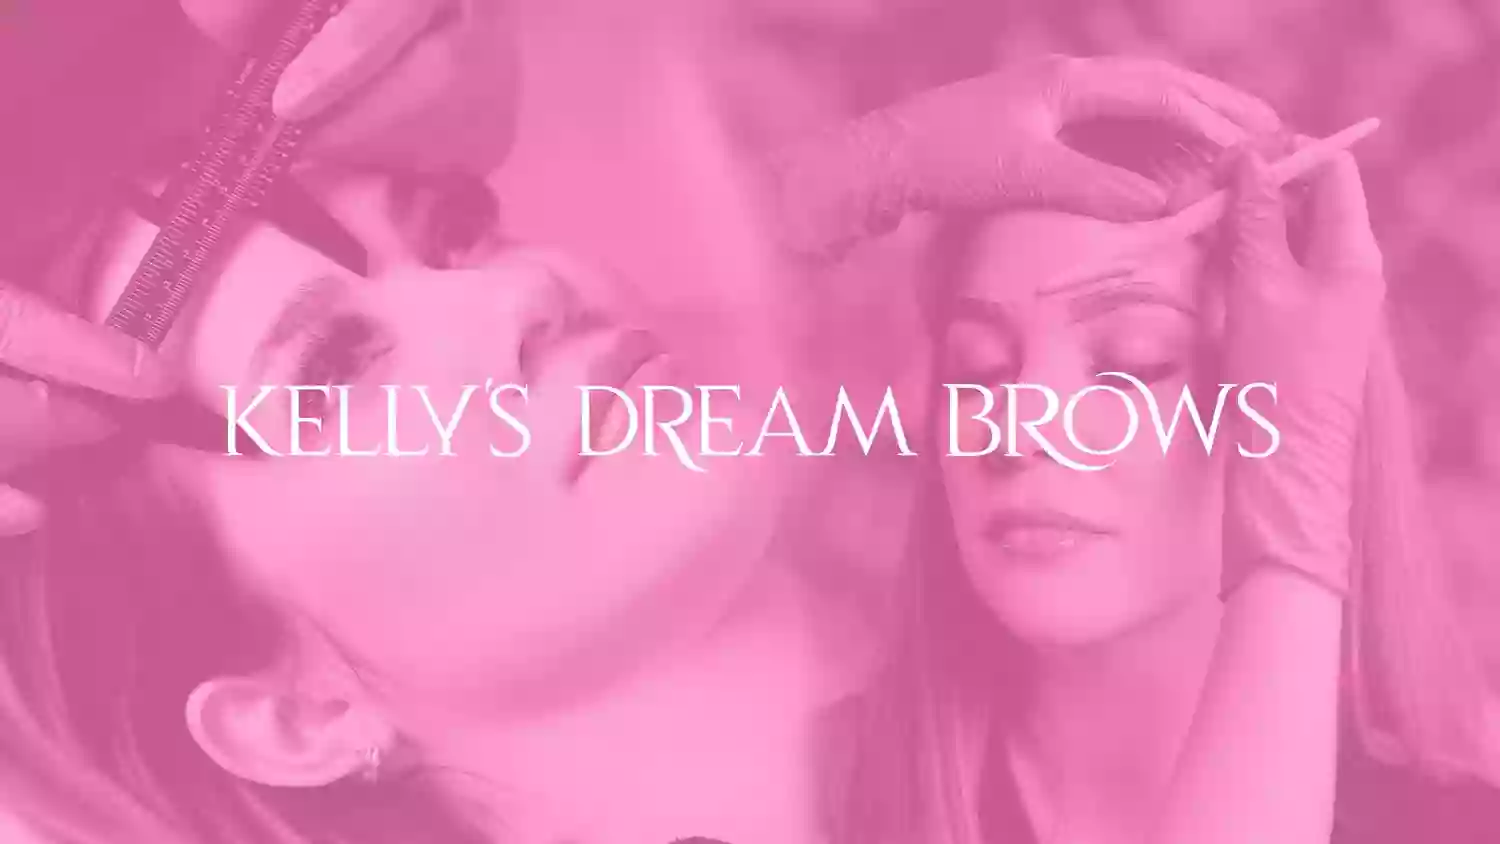 Kelly's Dream Brows